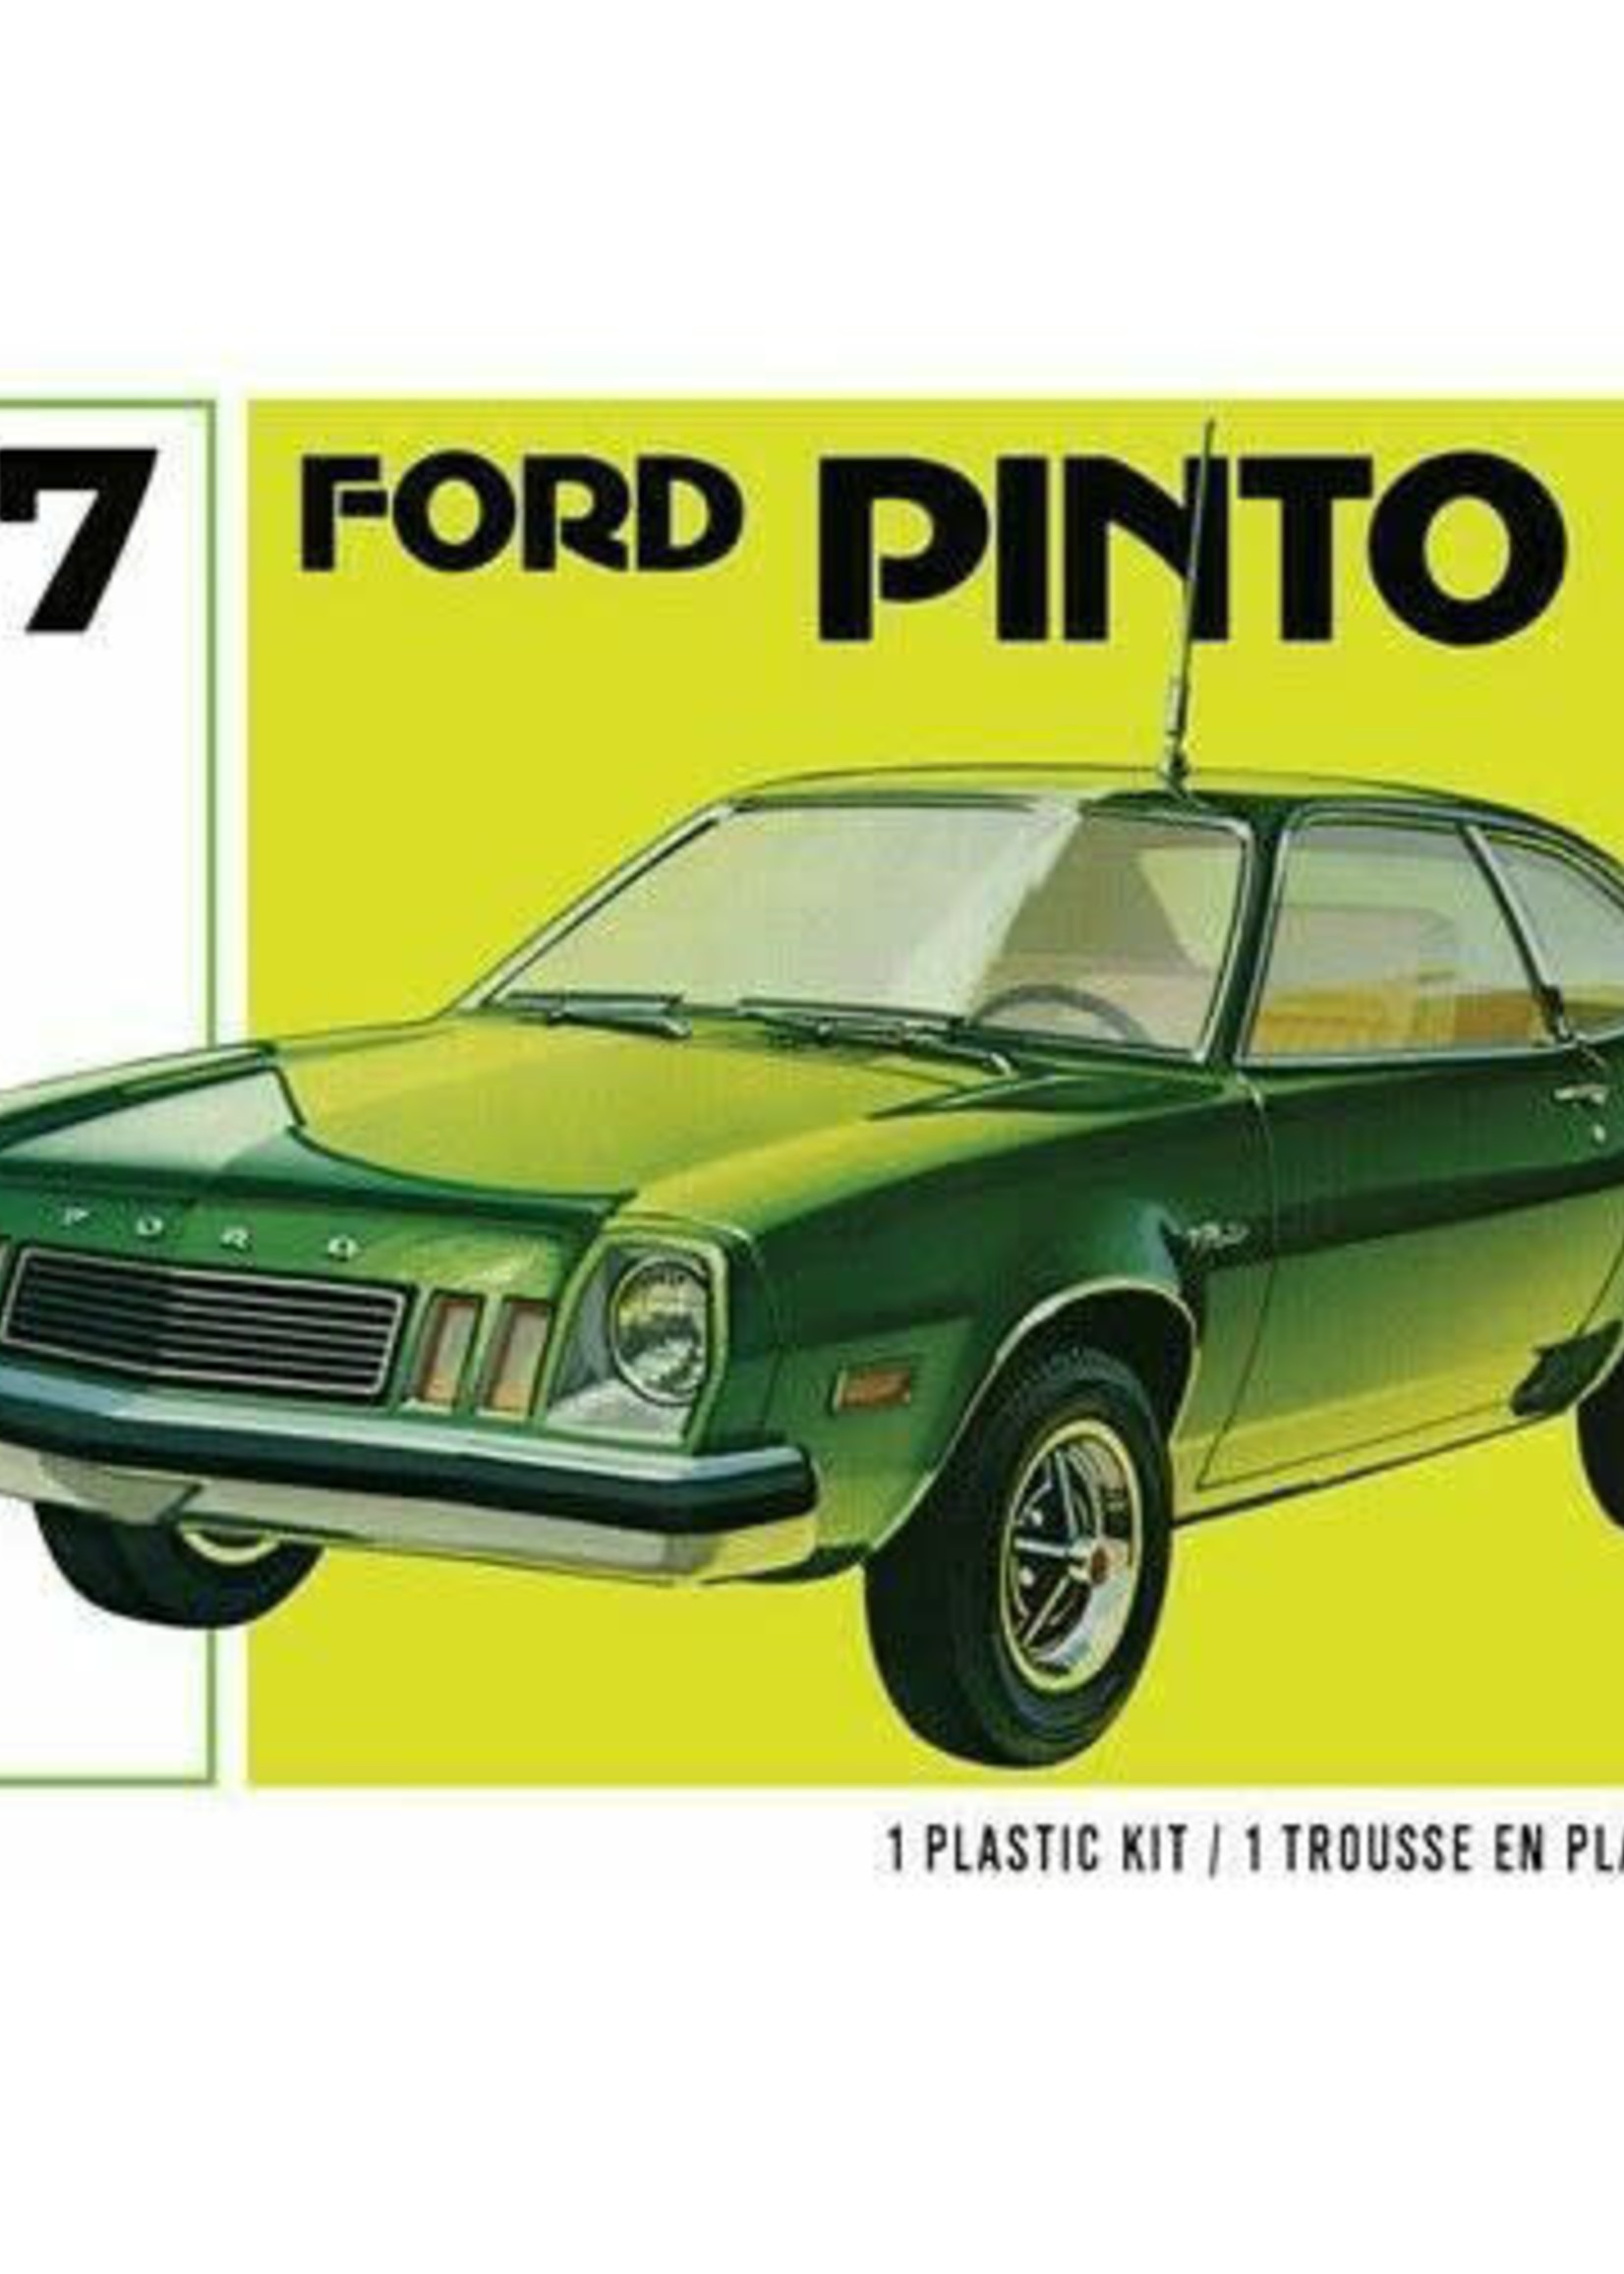 1/25 1977 Ford Pinto